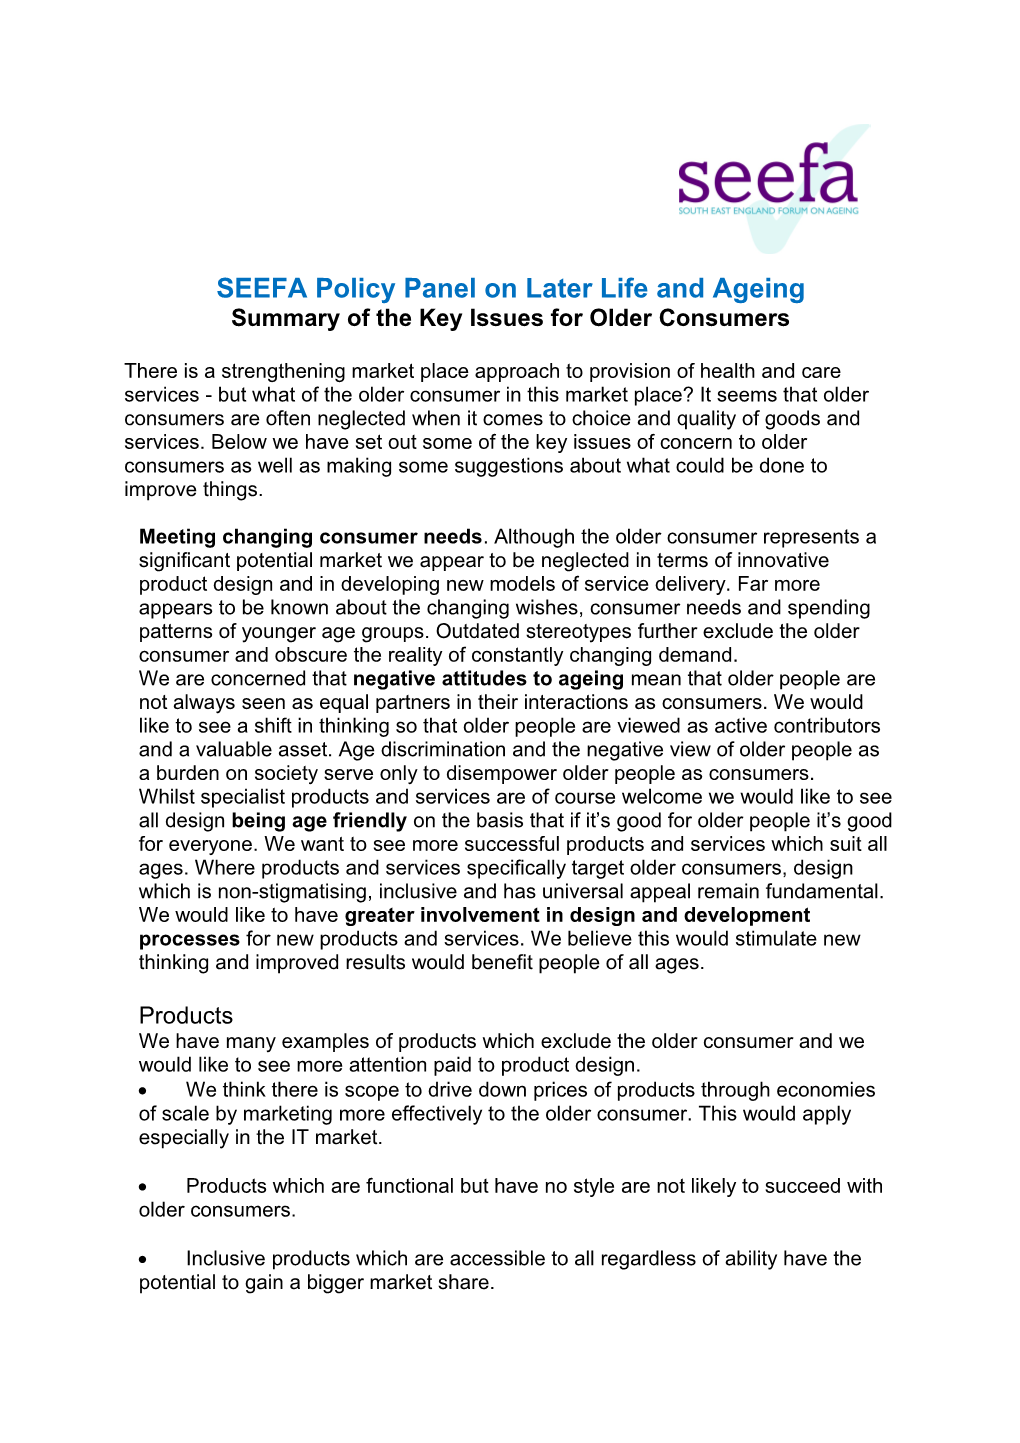 SEEFA Policy Panel on Later Life and Ageing